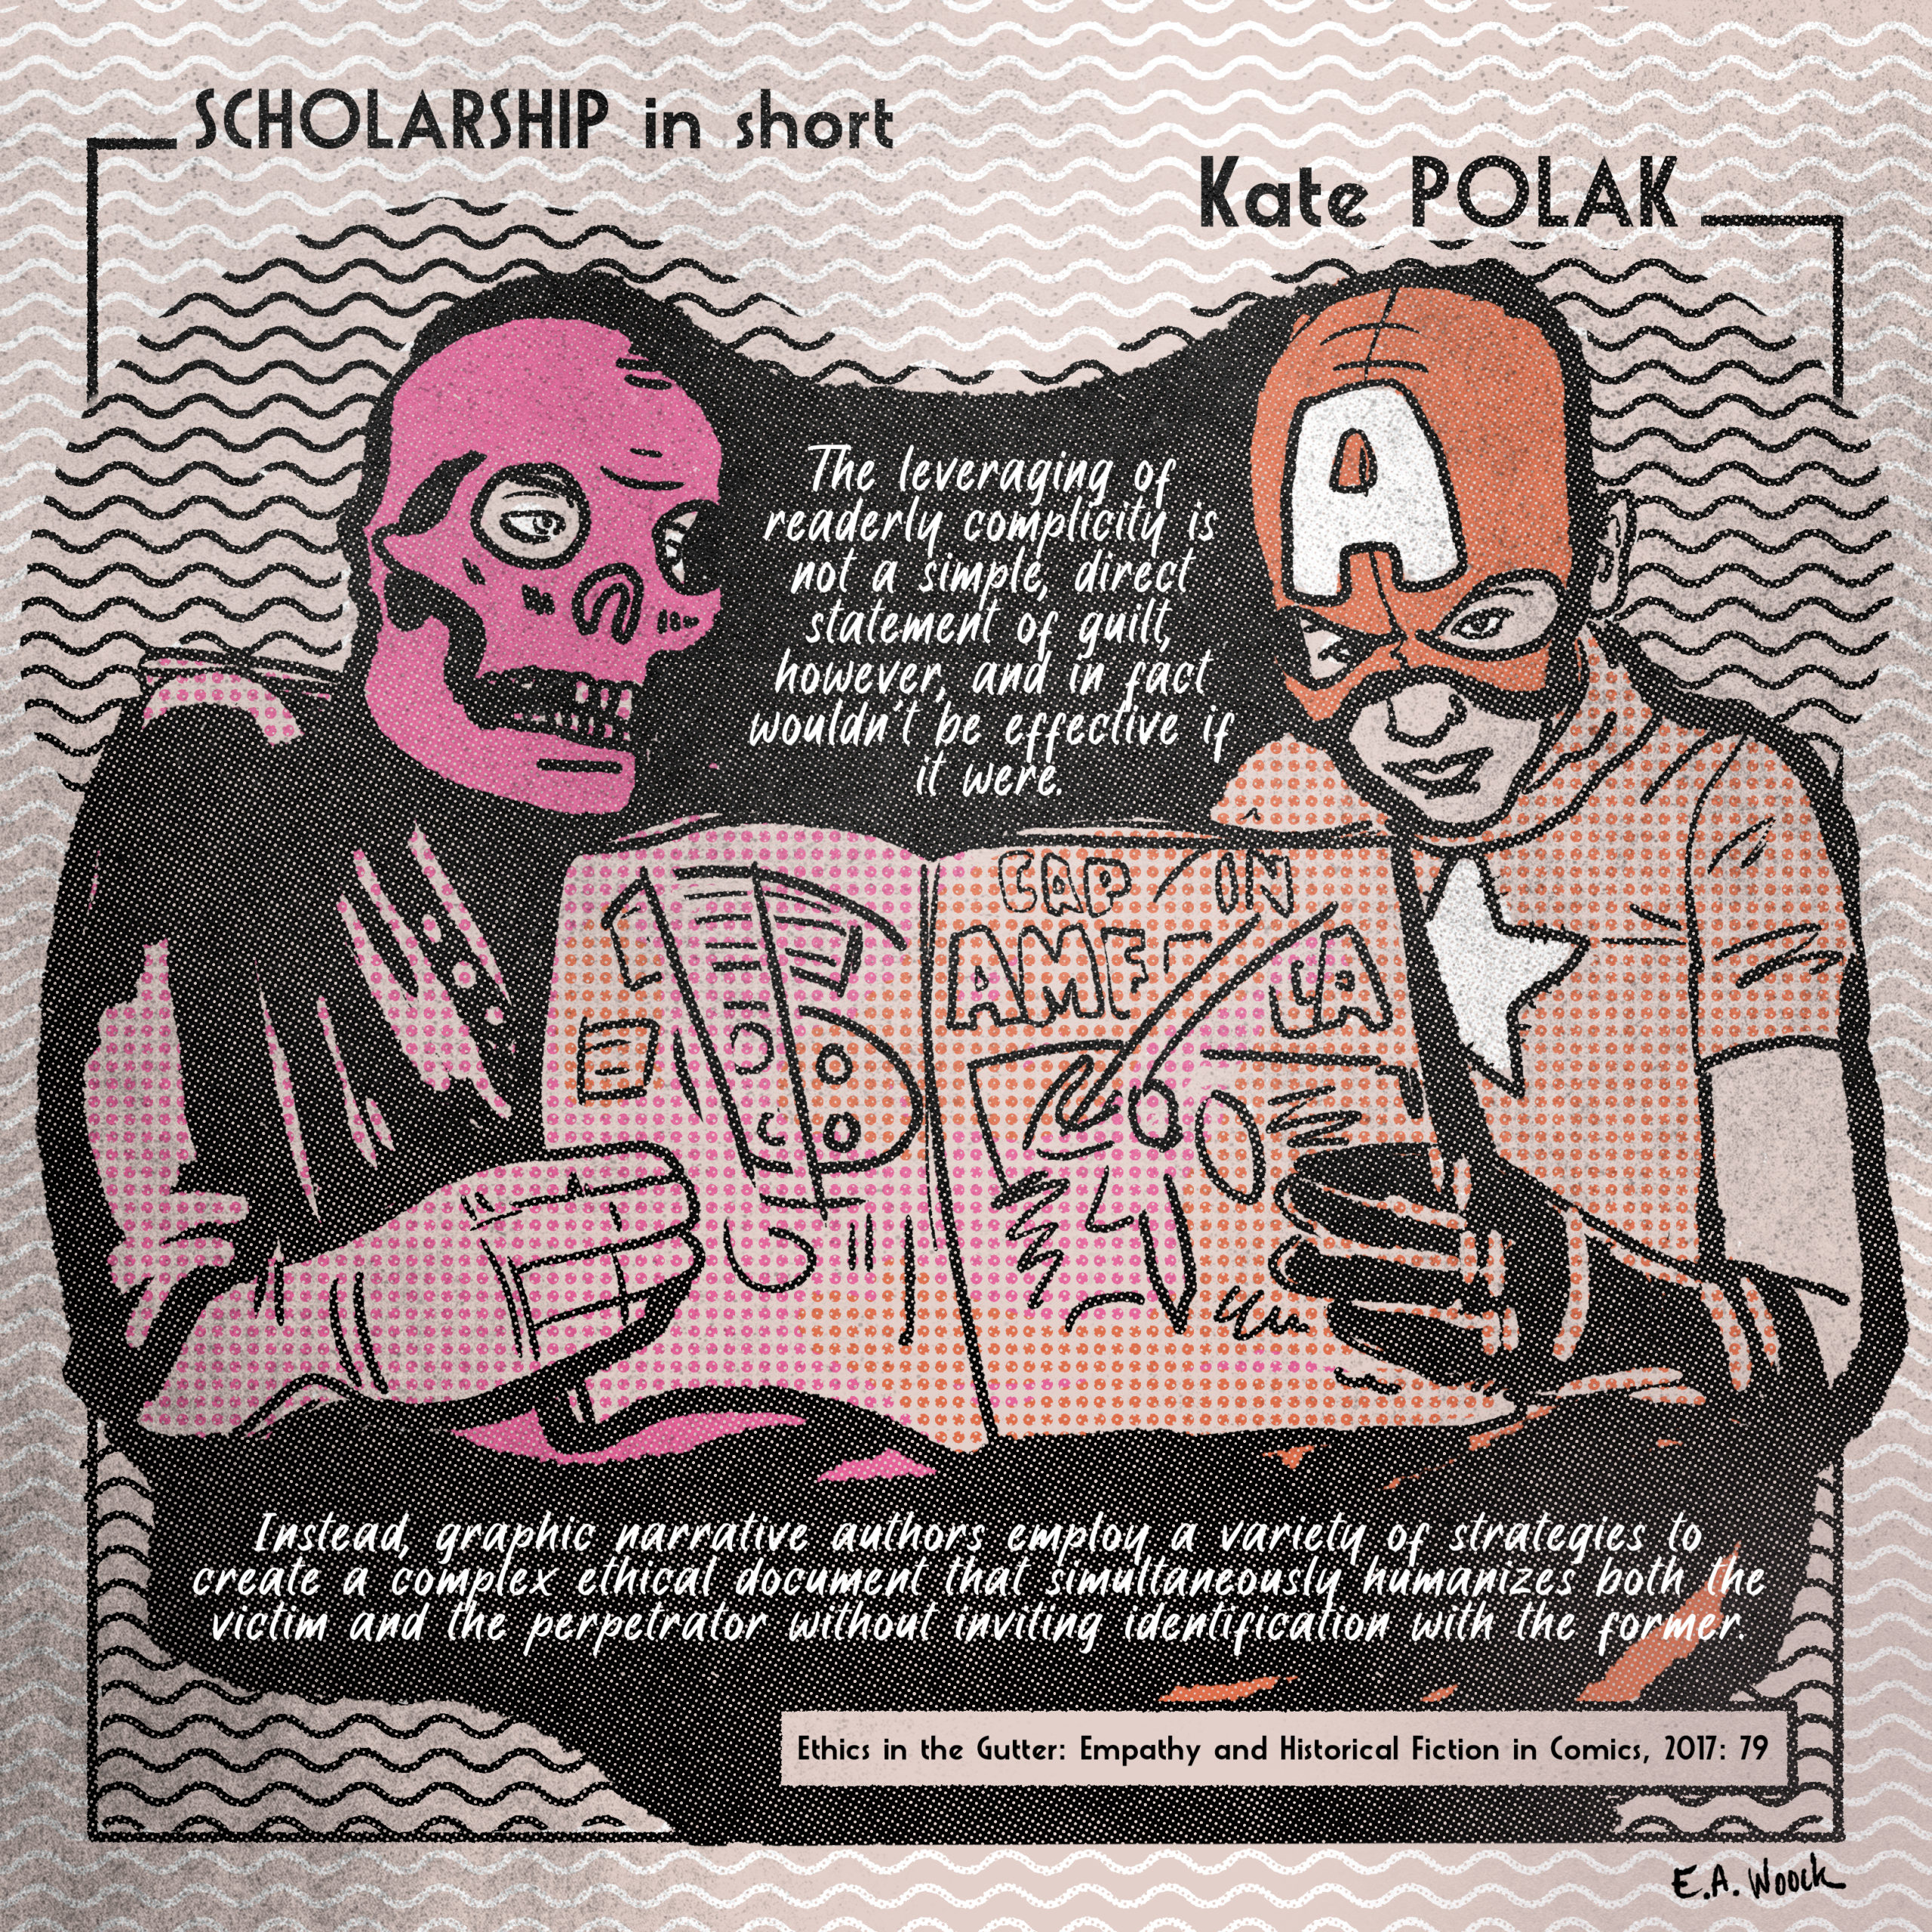 Kate Polak, Ethics in the Gutter: Empathy and Historical Fiction in Comics (Ohio State University Press: 2017)